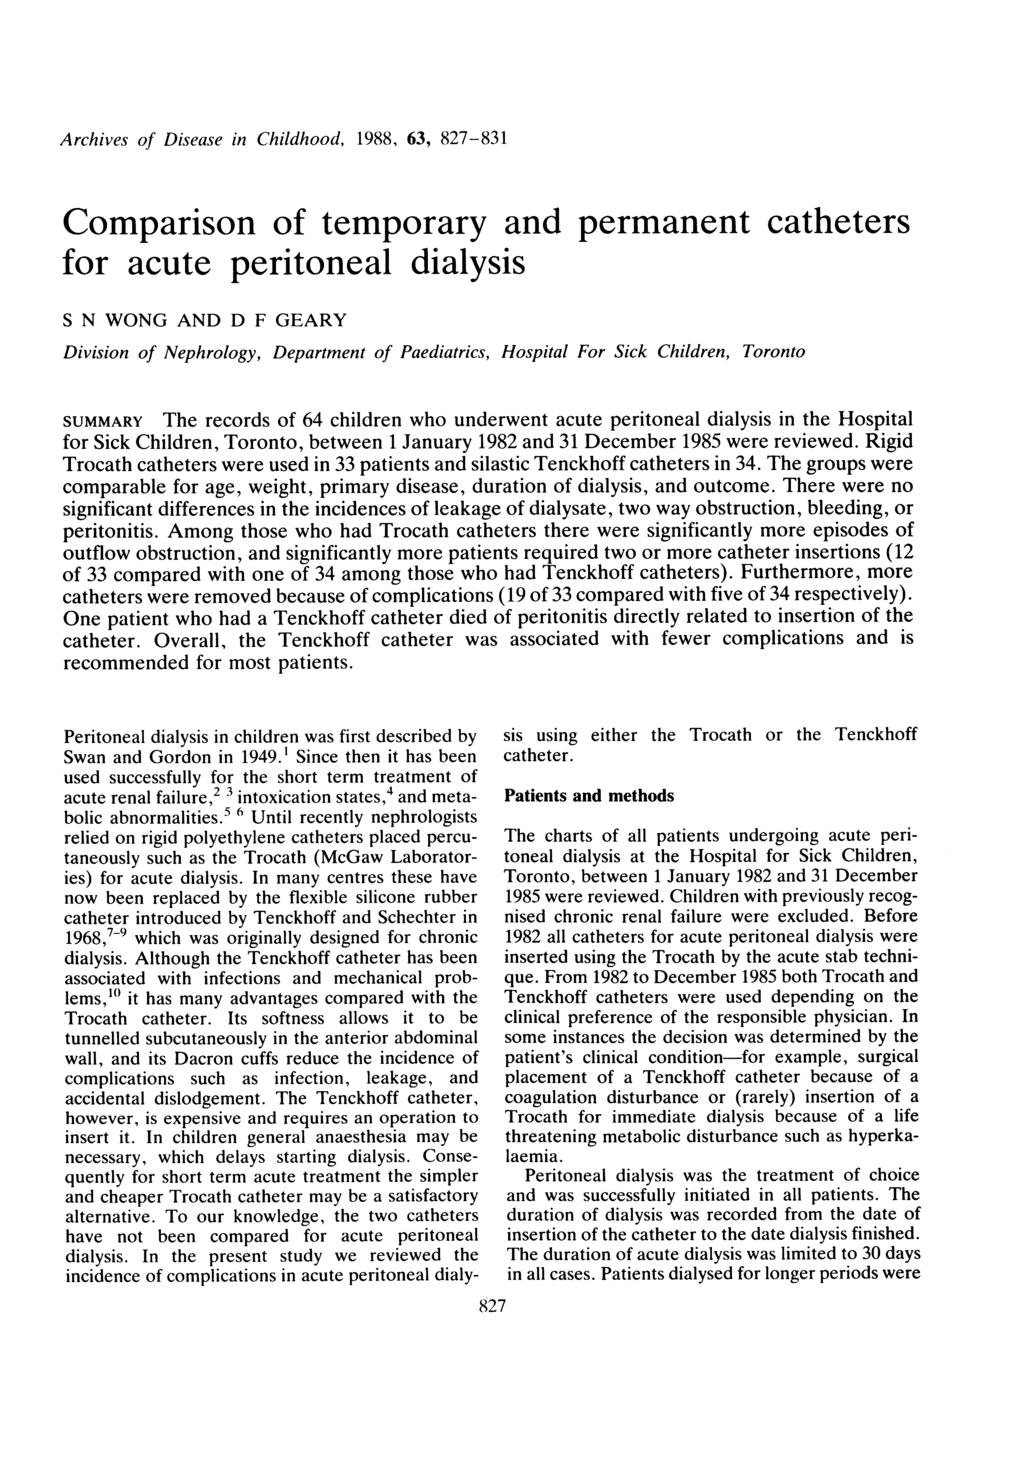 Archives of Disease in Childhood, 1988, 63, 827-831 Comparison of temporary and permanent for acute peritoneal dialysis S N WONG AND D F GEARY Division of Nephrology, Department of Paediatrics,